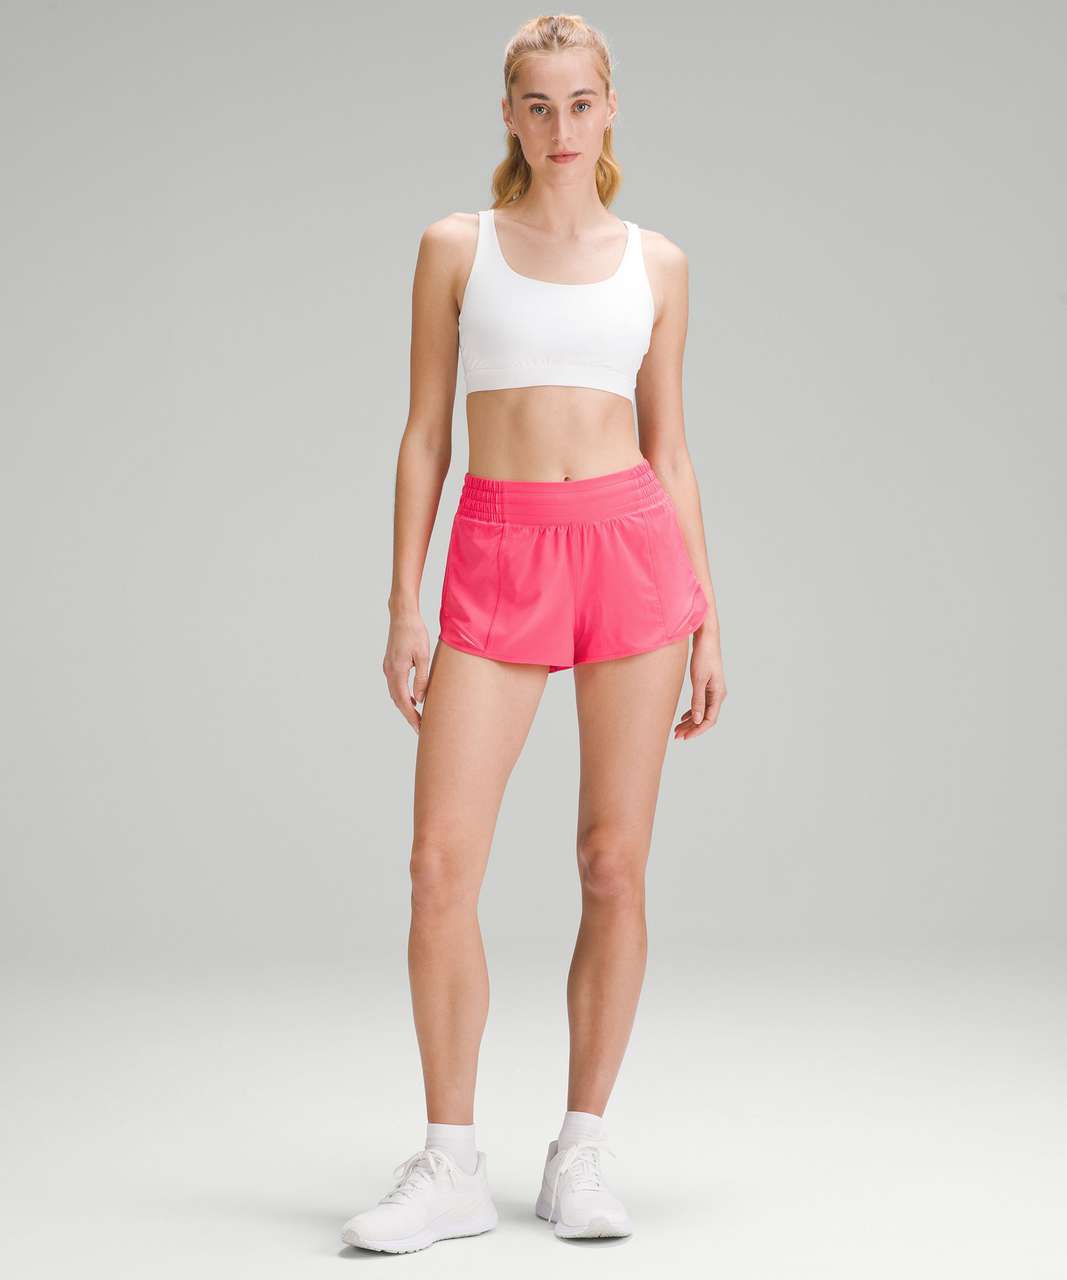 NEW LULULEMON SHORTS TRY ON REVIEW / HOTTY HOT HIGH RISE LINED SHORT HAUL 